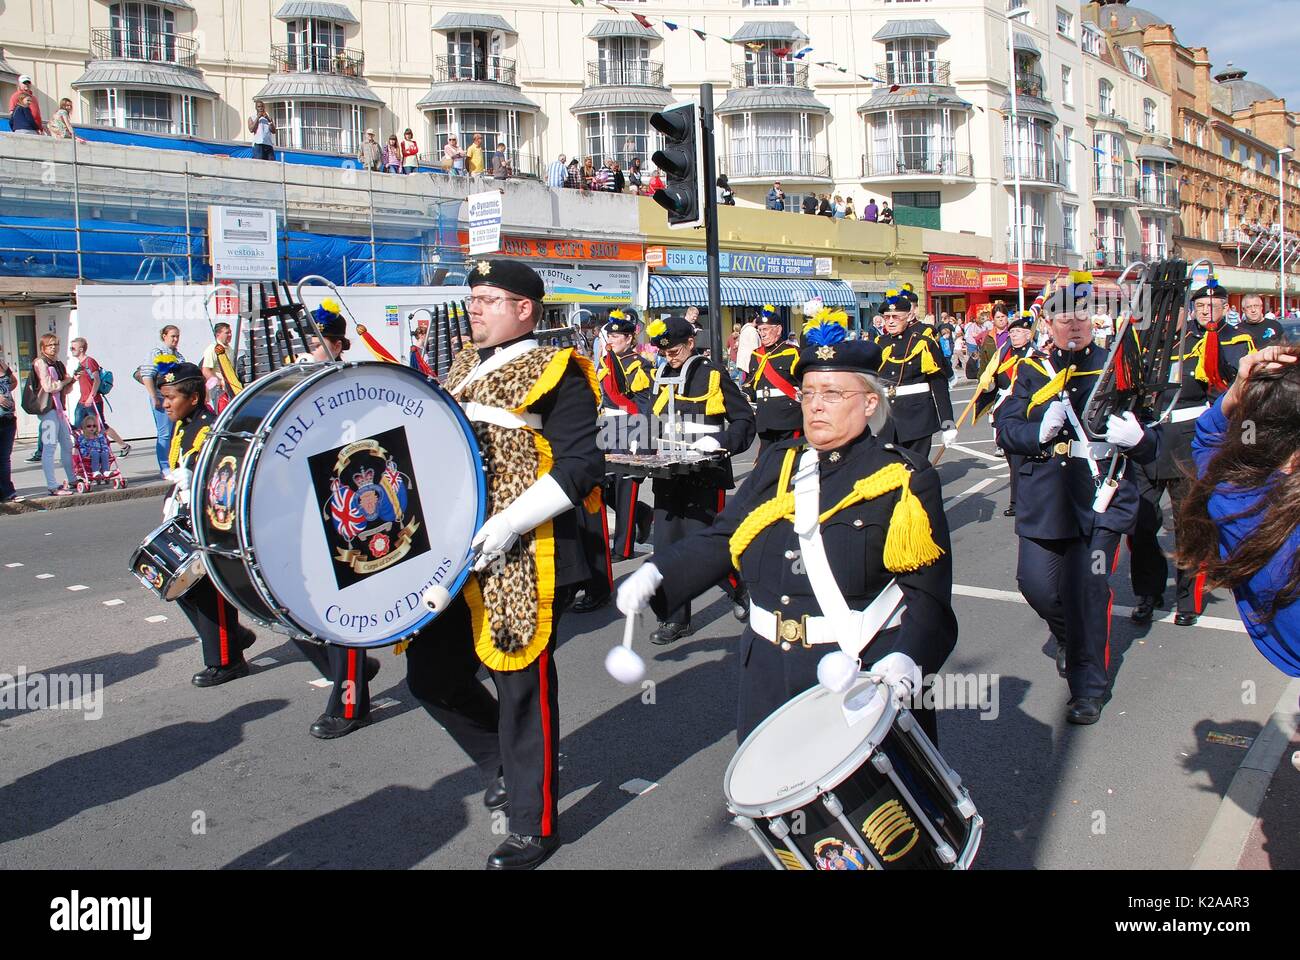 The Farborough Royal British Legion Corps of Drums take part in the seafront parade at the Old Town Carnival at Hastings, England on August 10, 2013. Stock Photo